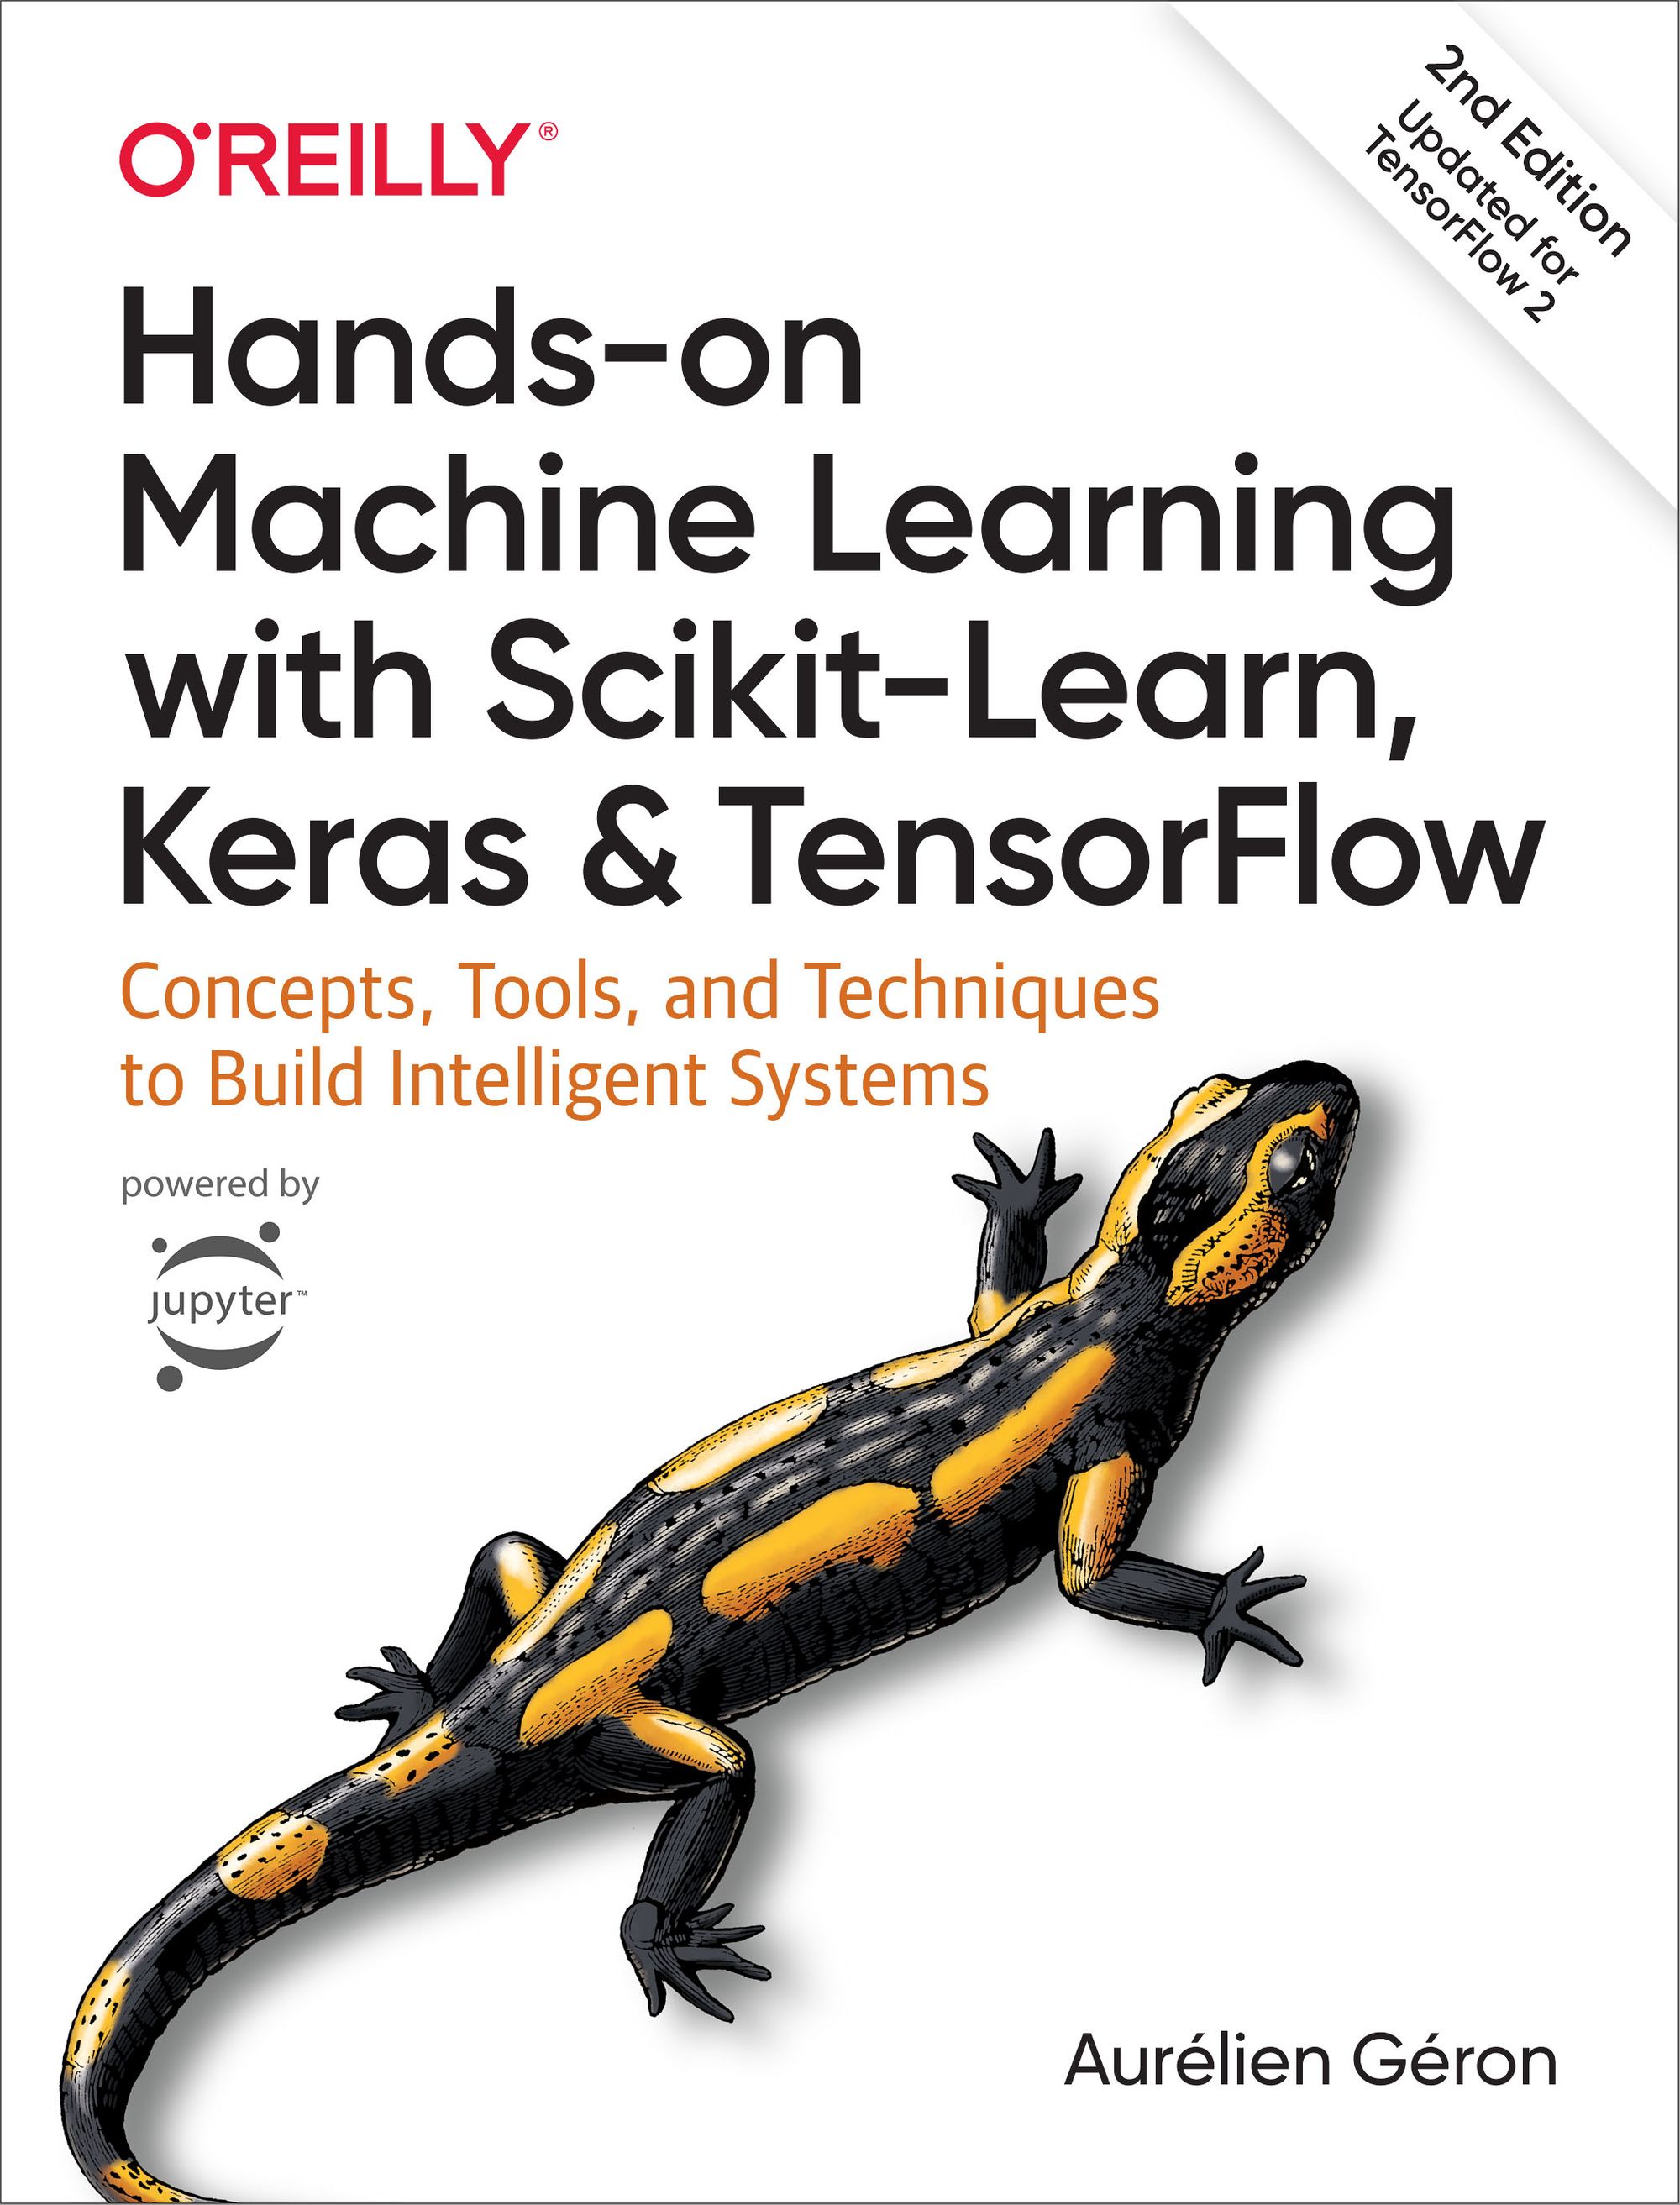 Handson Machine Learning with scikit-learn keras and Tensorflow